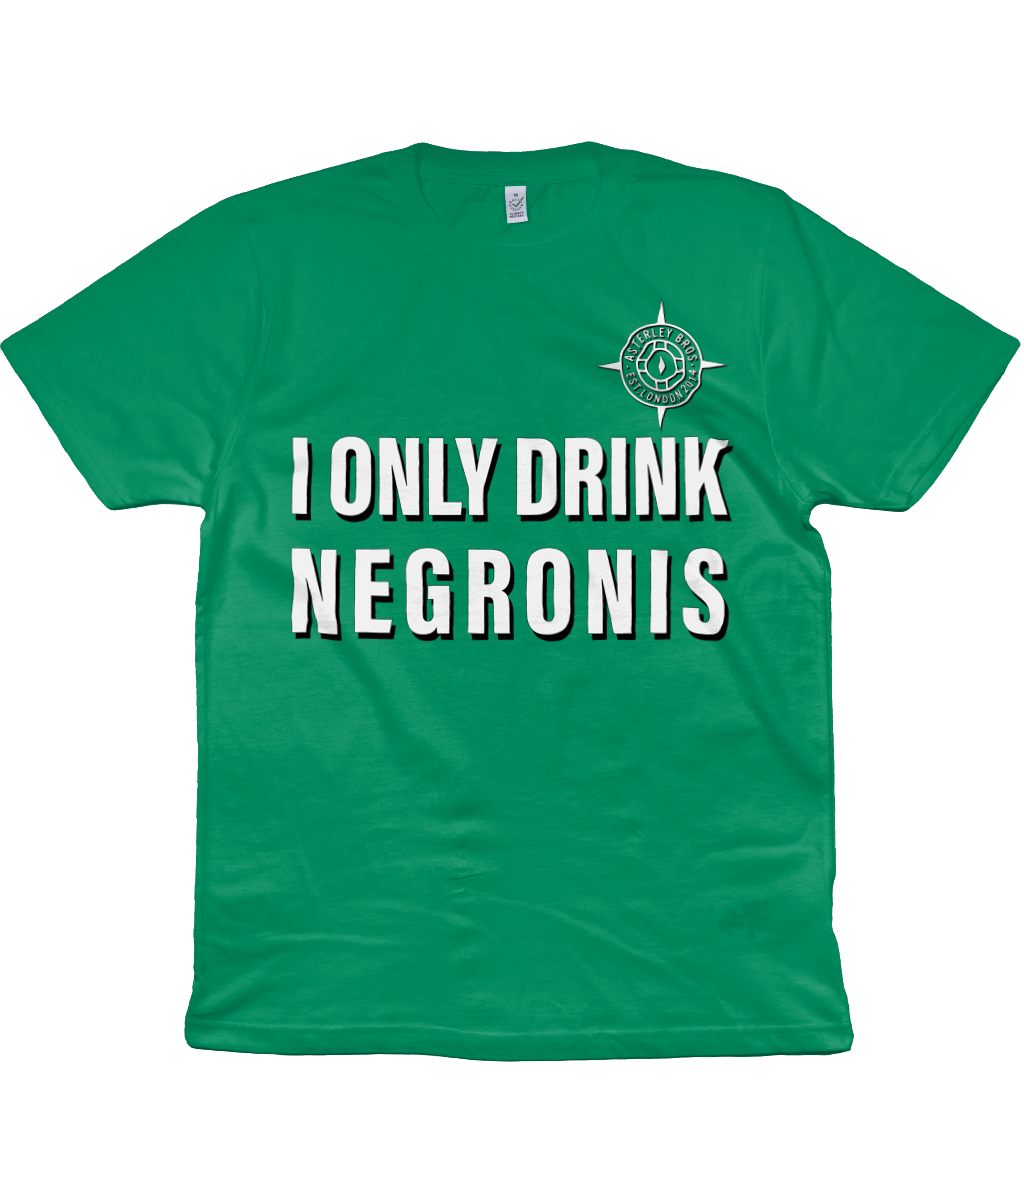 I ONLY DRINK NEGRONIS - THE SHIRT